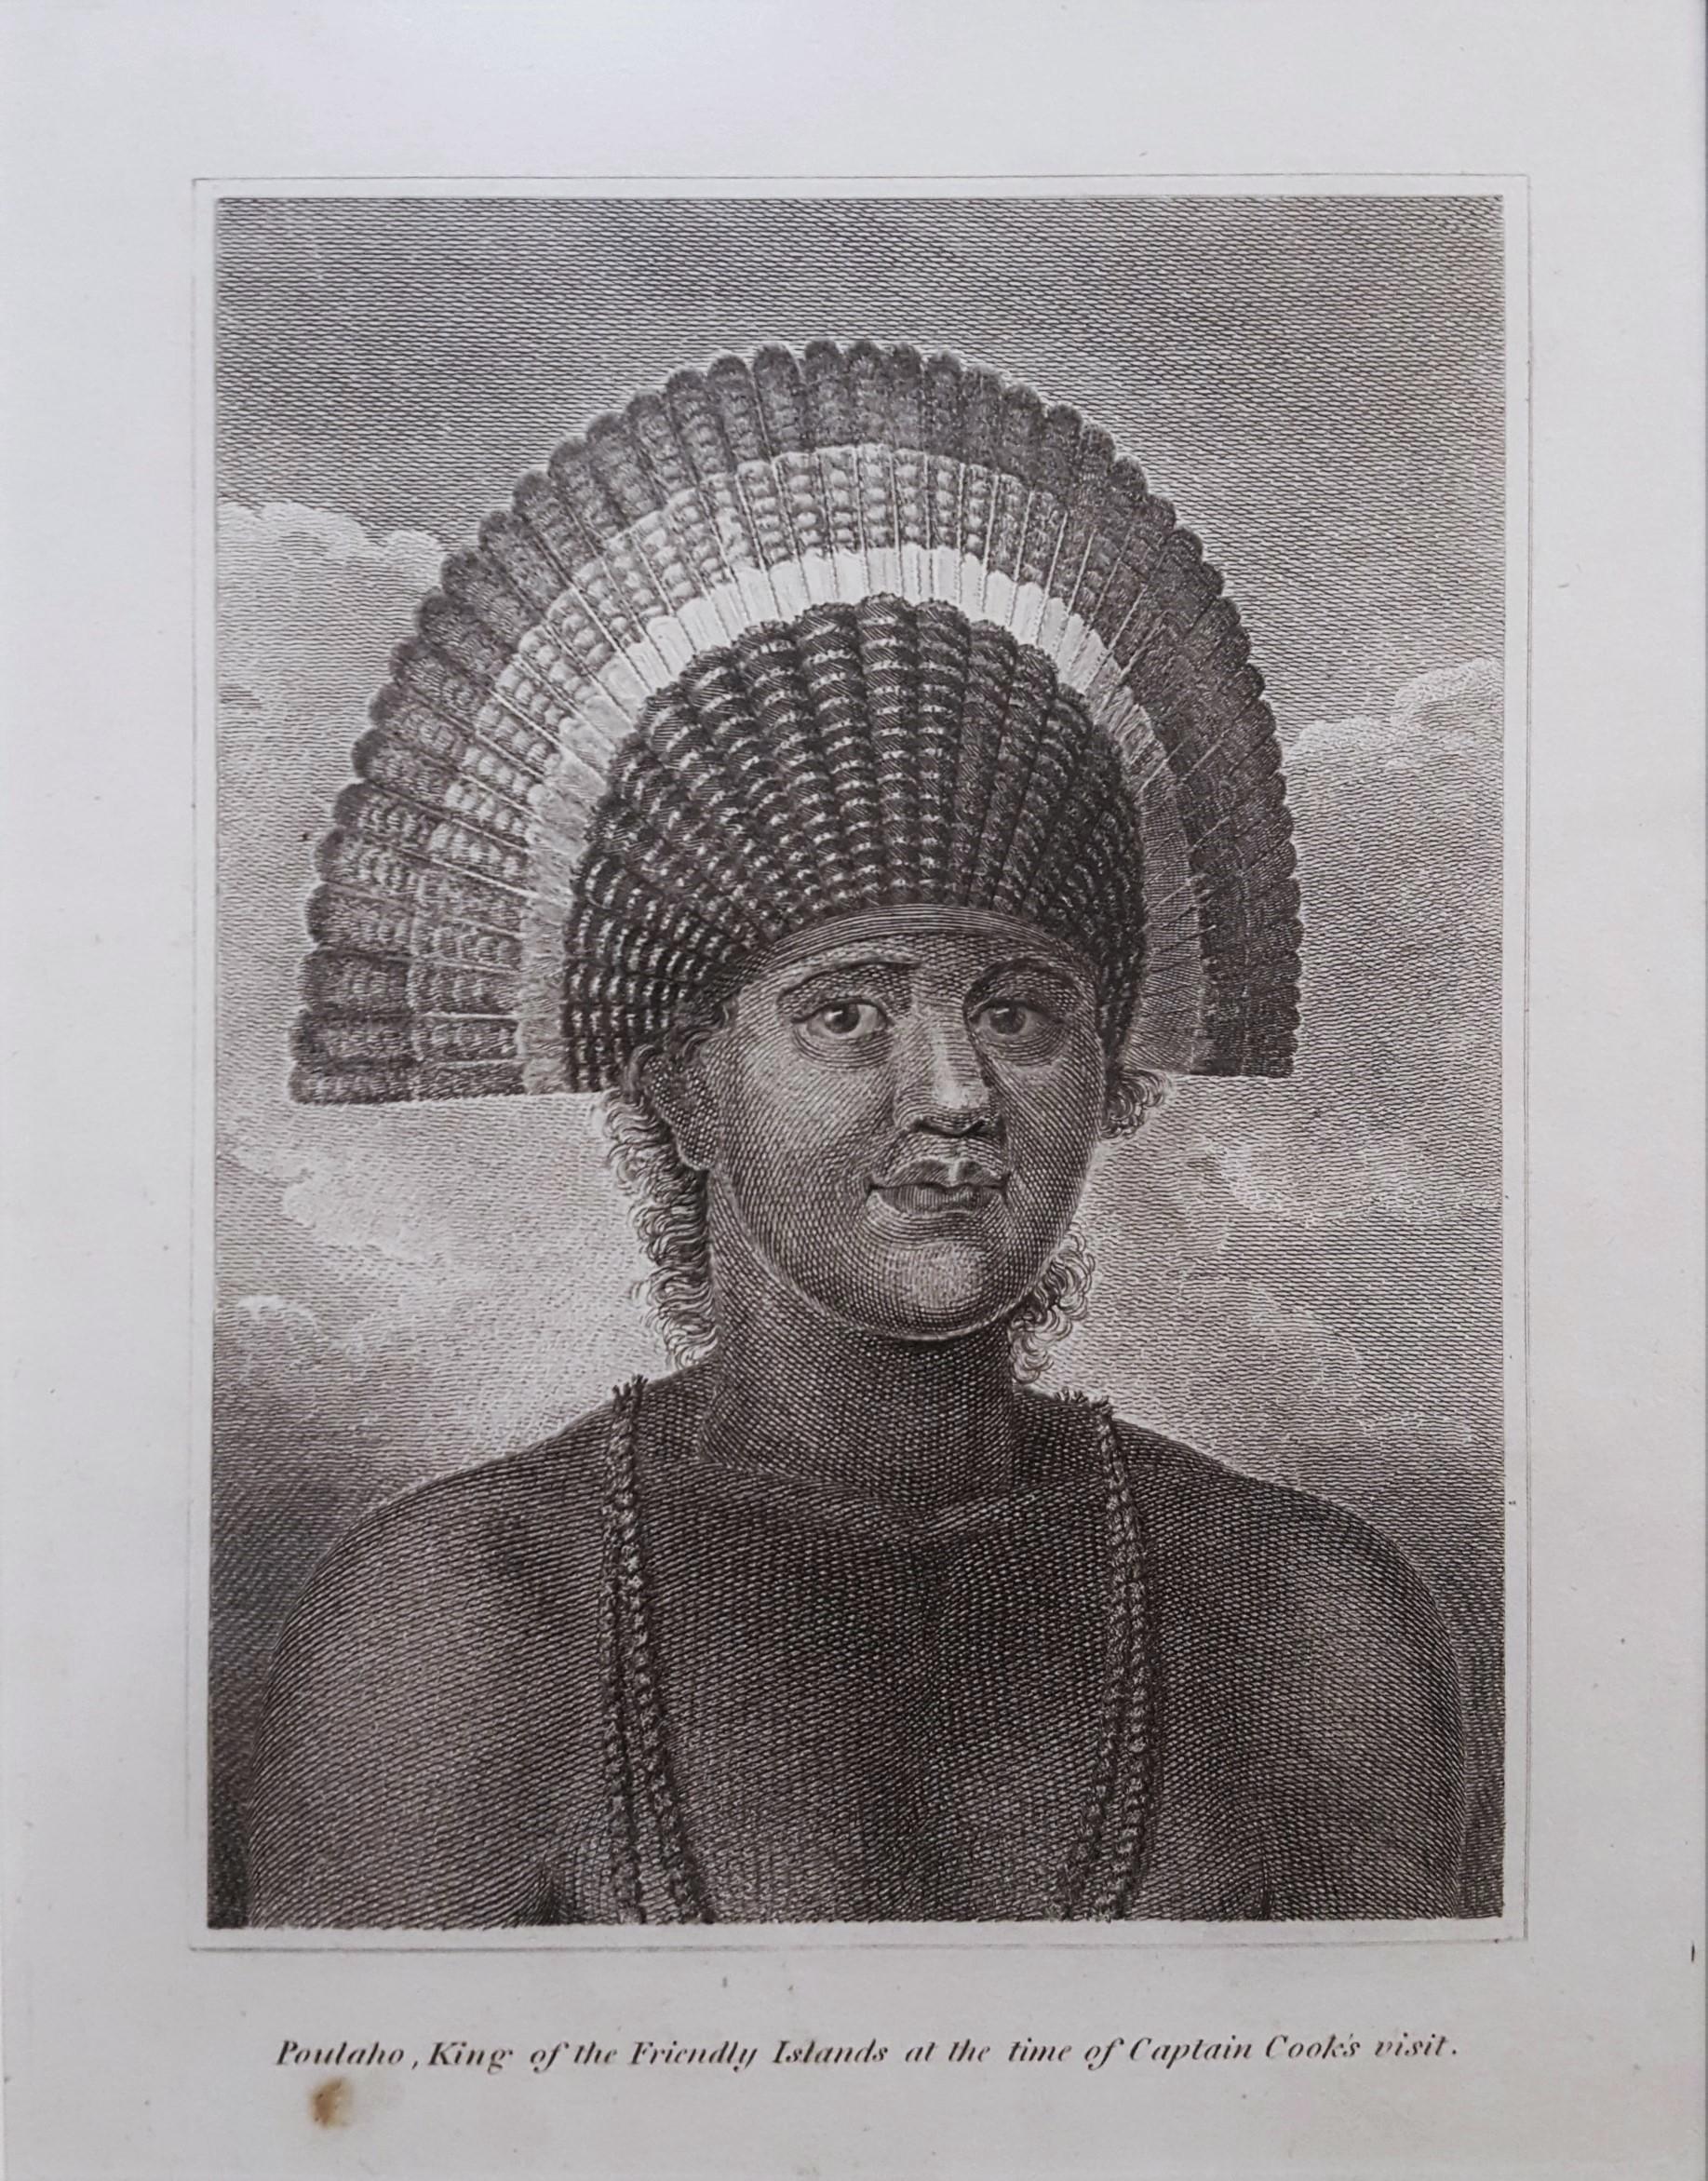 Poulaho, King of the Friendly Islands - Print by After John Webber